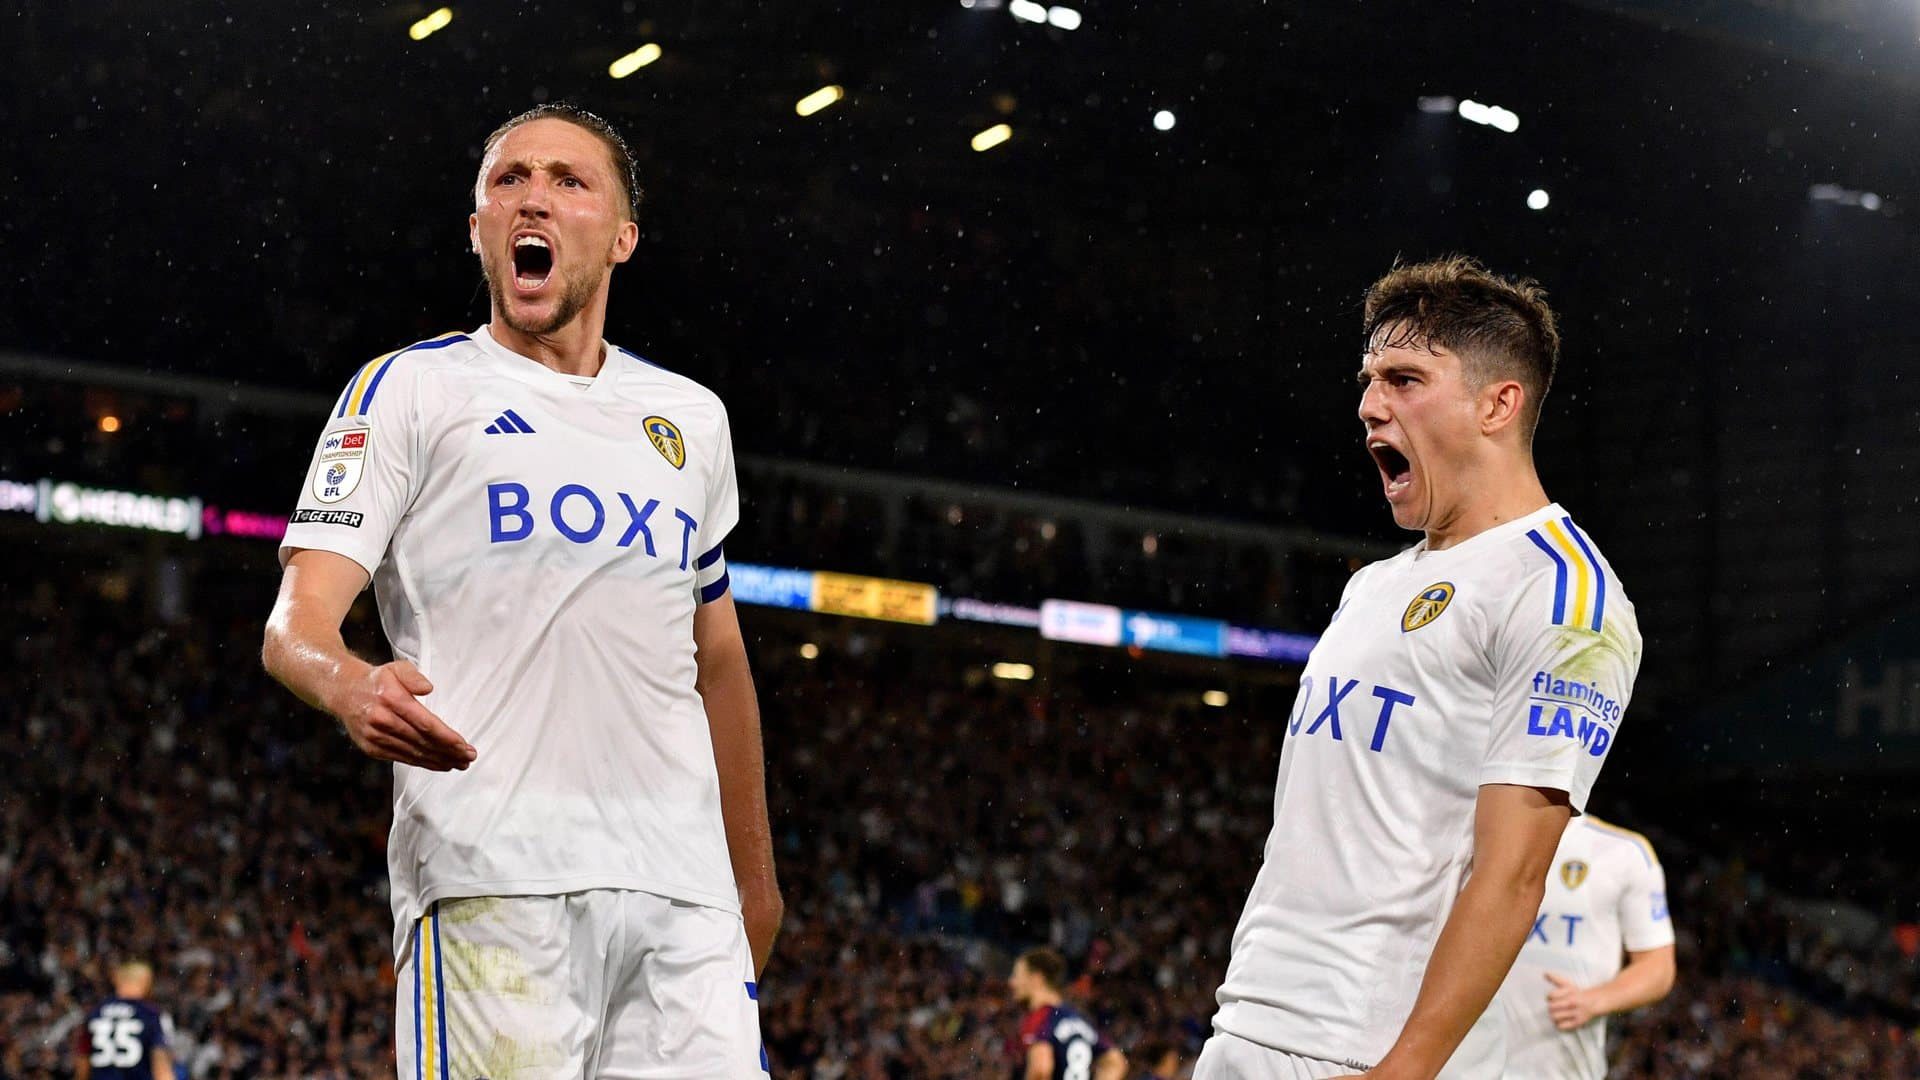 Luke Ayling and Dan James after they made Leeds' equaliser against West Brom, standing in front of the Kop and yelling very sternly